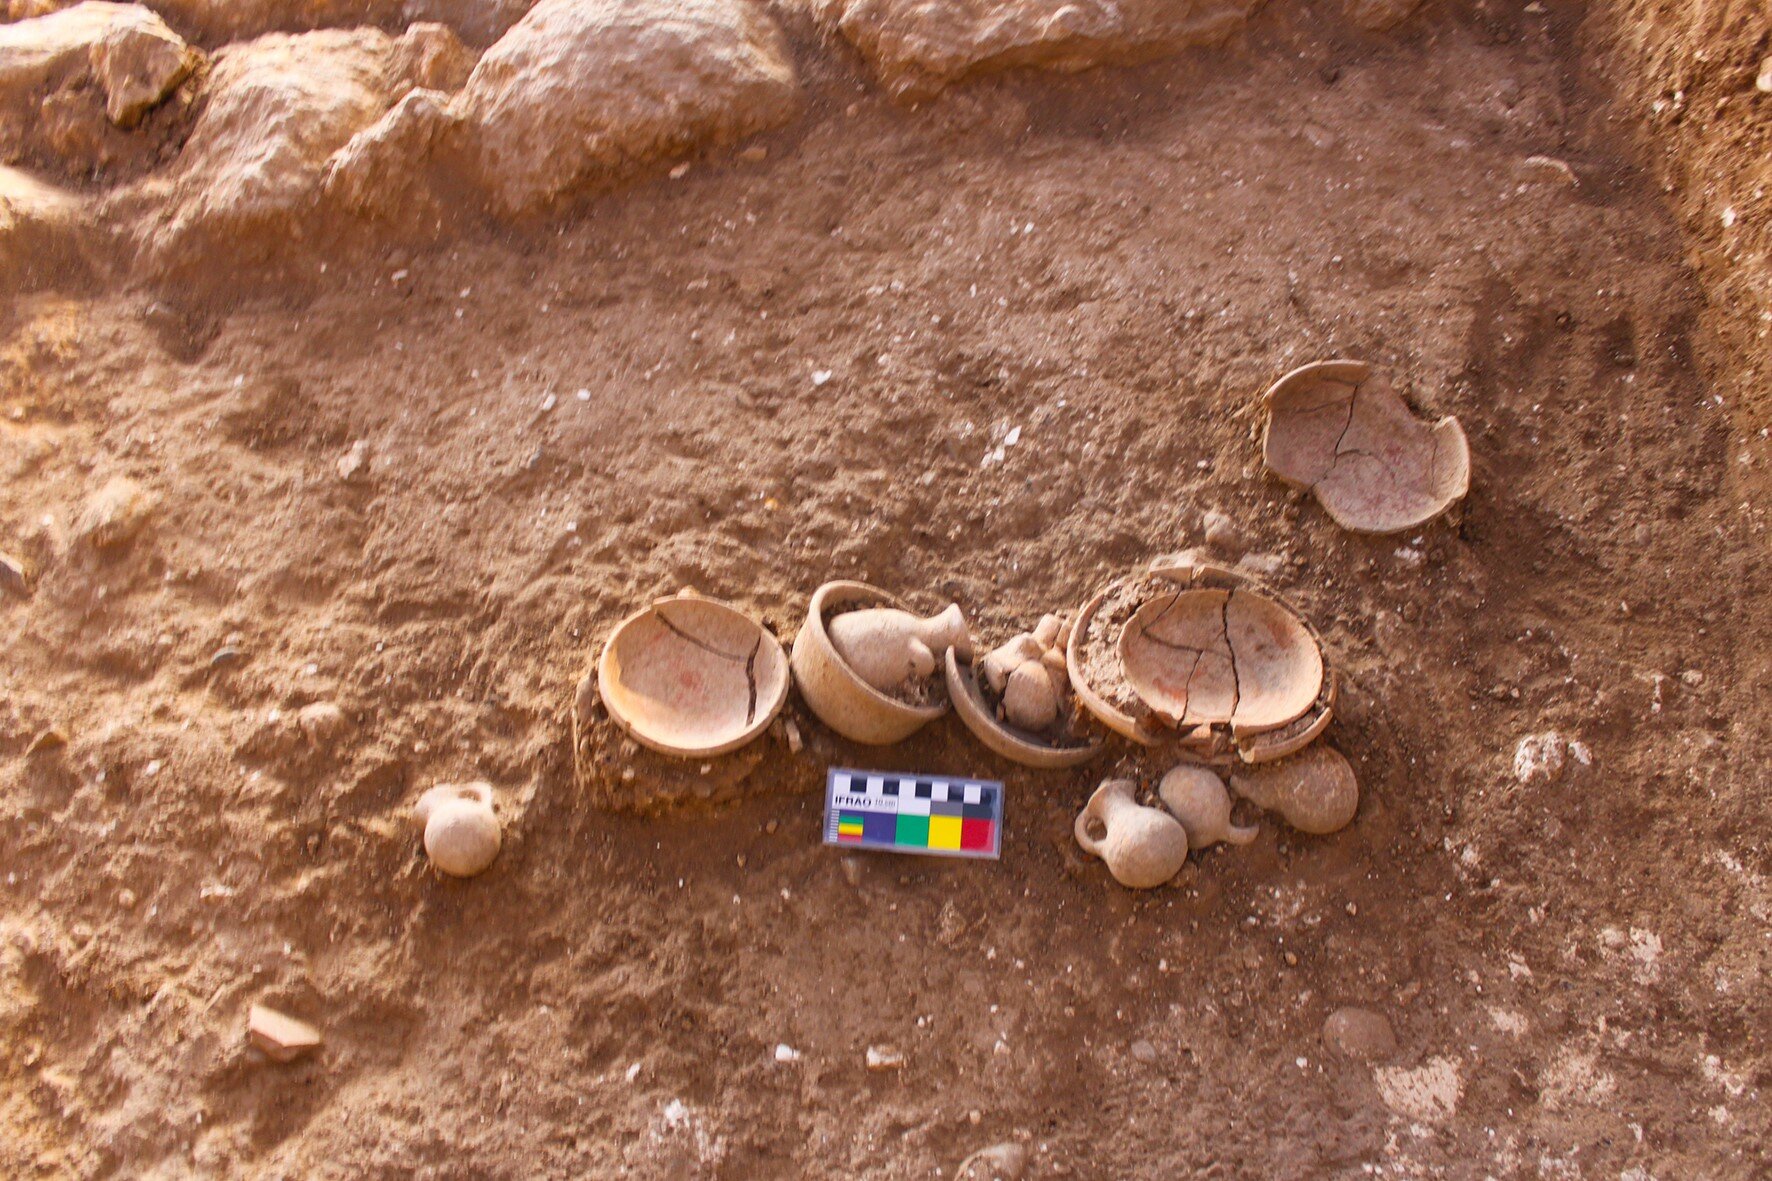 Plant seed and fruit analysis from the biblical home of Goliath sheds unprecedented light on Philistine ritual practices